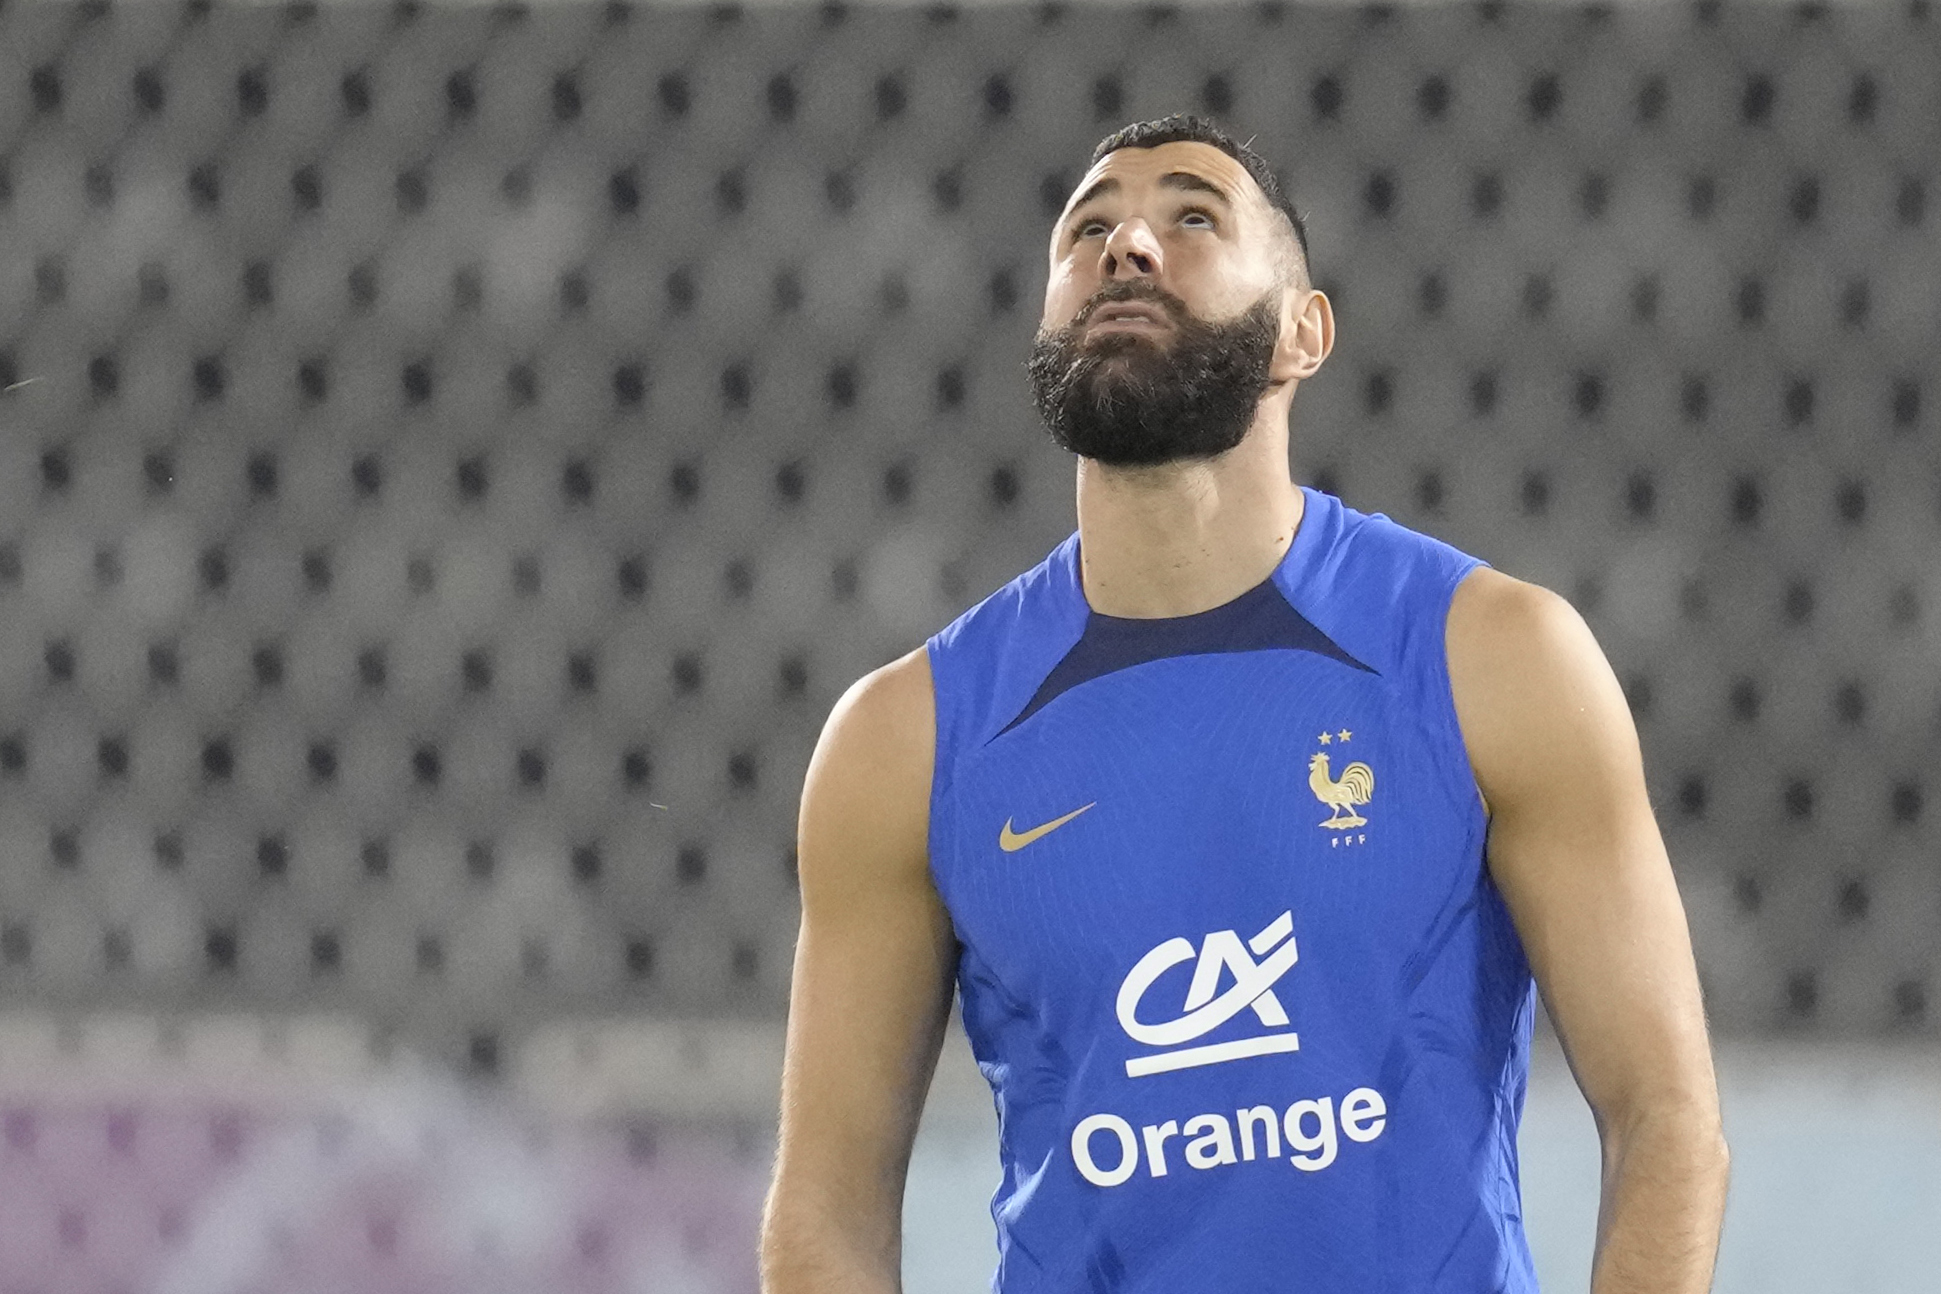 France's Karim  lt;HIT gt;Benzema lt;/HIT gt; watches the ball during a training session at the Jassim Bin Hamad stadium in Doha, Qatar, Saturday, Nov. 19, 2022. France will play their first match in the World Cup against Australia on Nov. 22. (AP Photo/Christophe Ena)